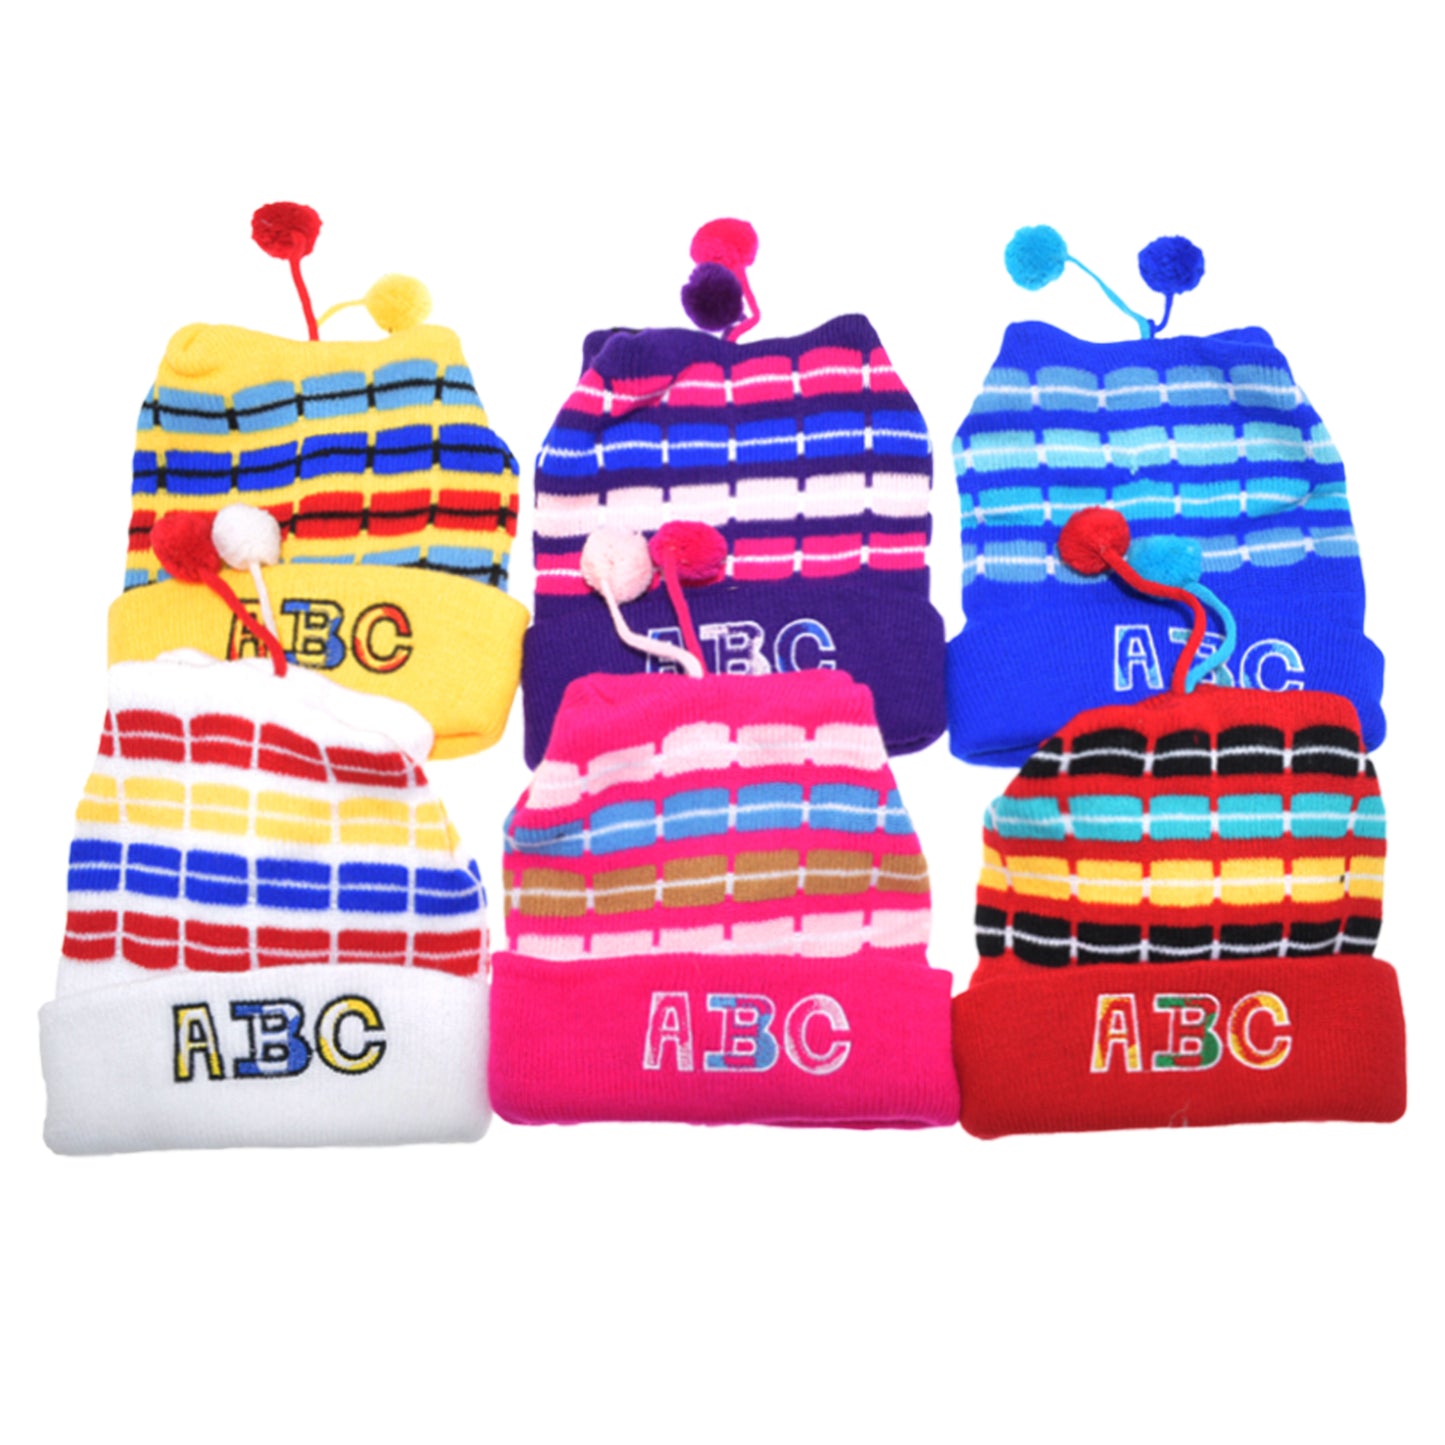 Maria Rosa Kids Winter Warmth Knit Bear Embroidered Beanies Cap Hat (6-Pack), #WH3207